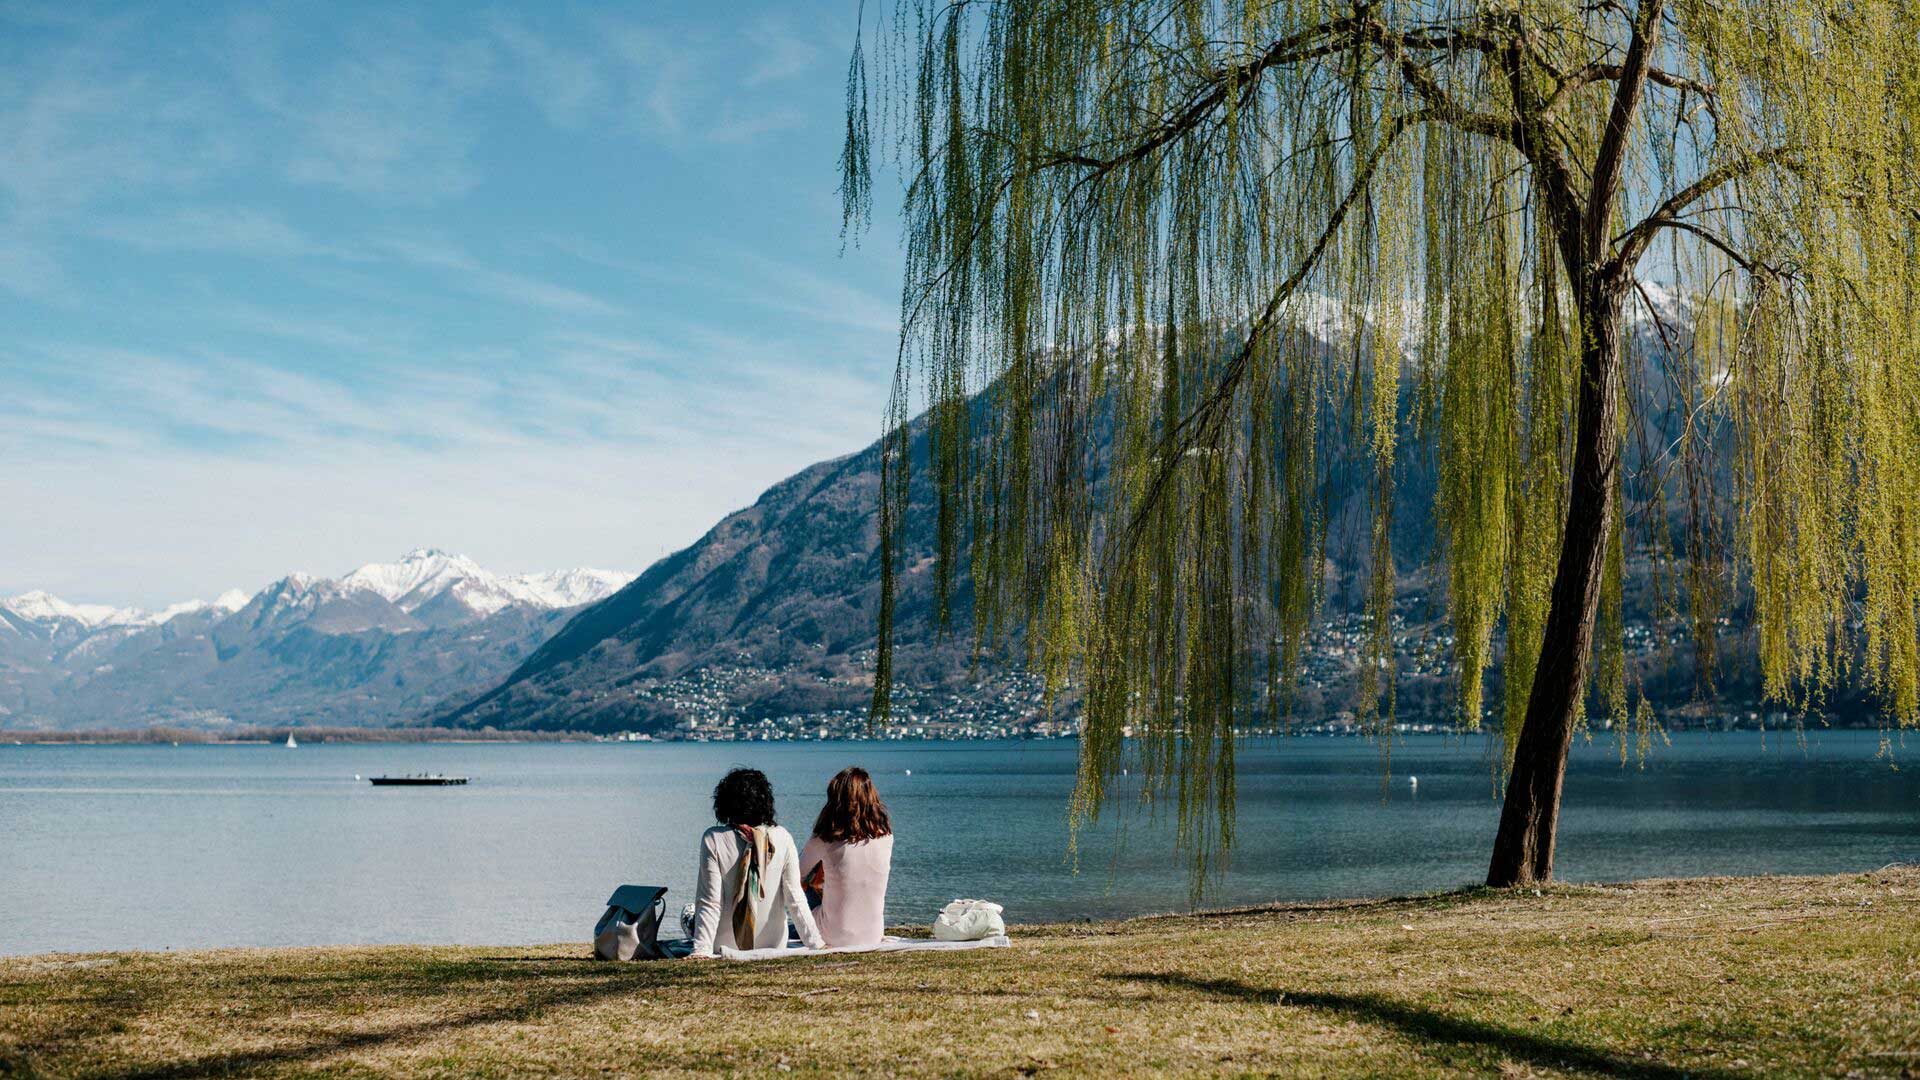 People having a picnic on the lakeshore at Lorcarno, Switzerland